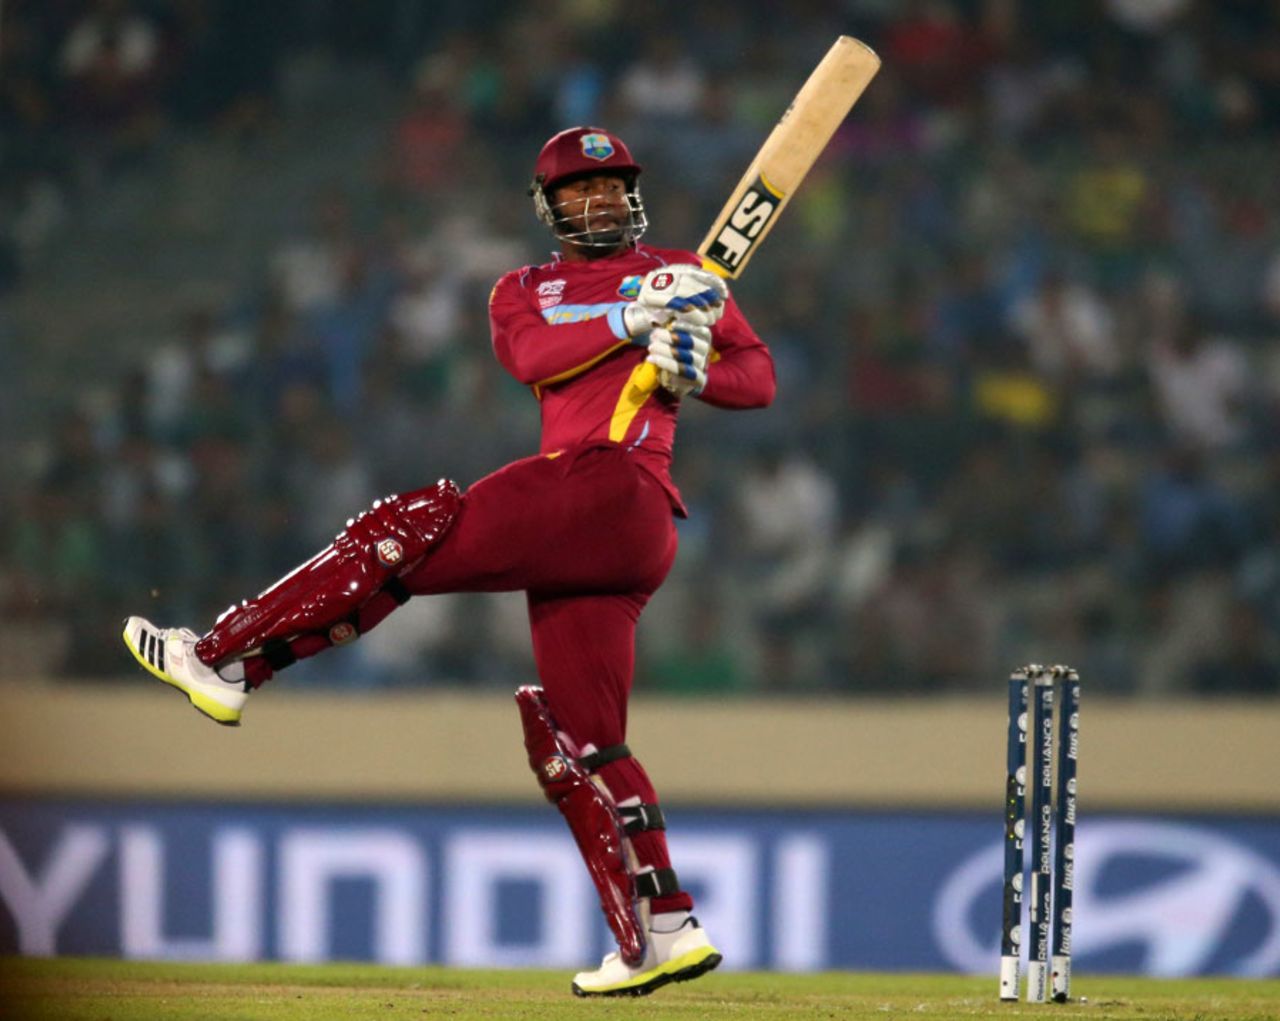 Dwayne Smith plodded to 11 off 29 balls, India v West Indies, World T20, Group 2, Mirpur, March 23, 2014